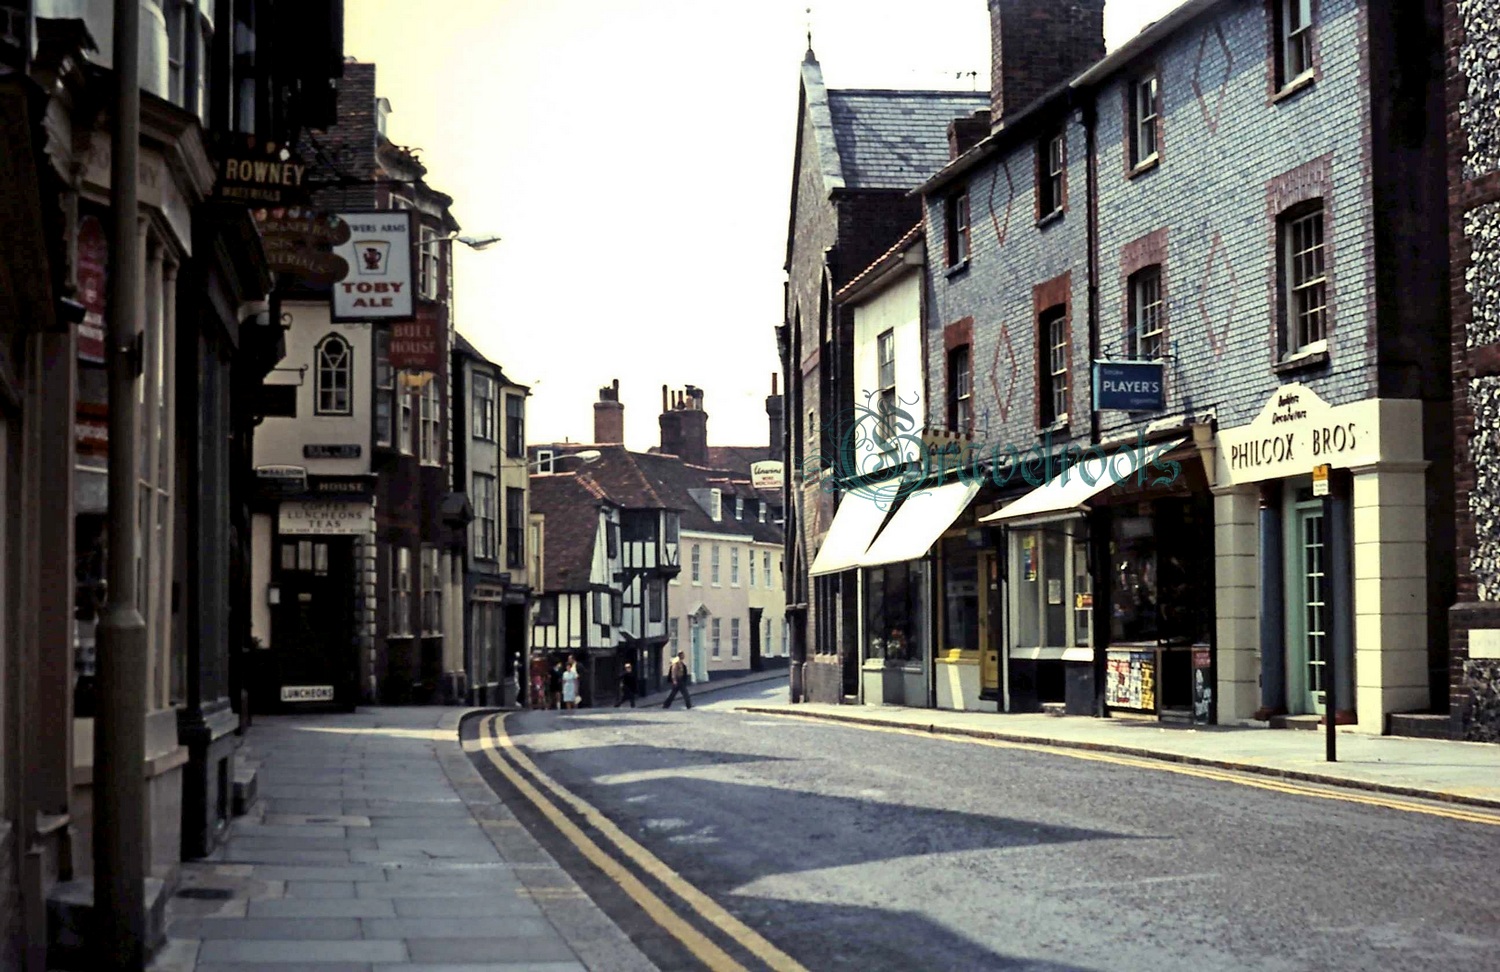  old photo of Lewes, Sussex - click image to return